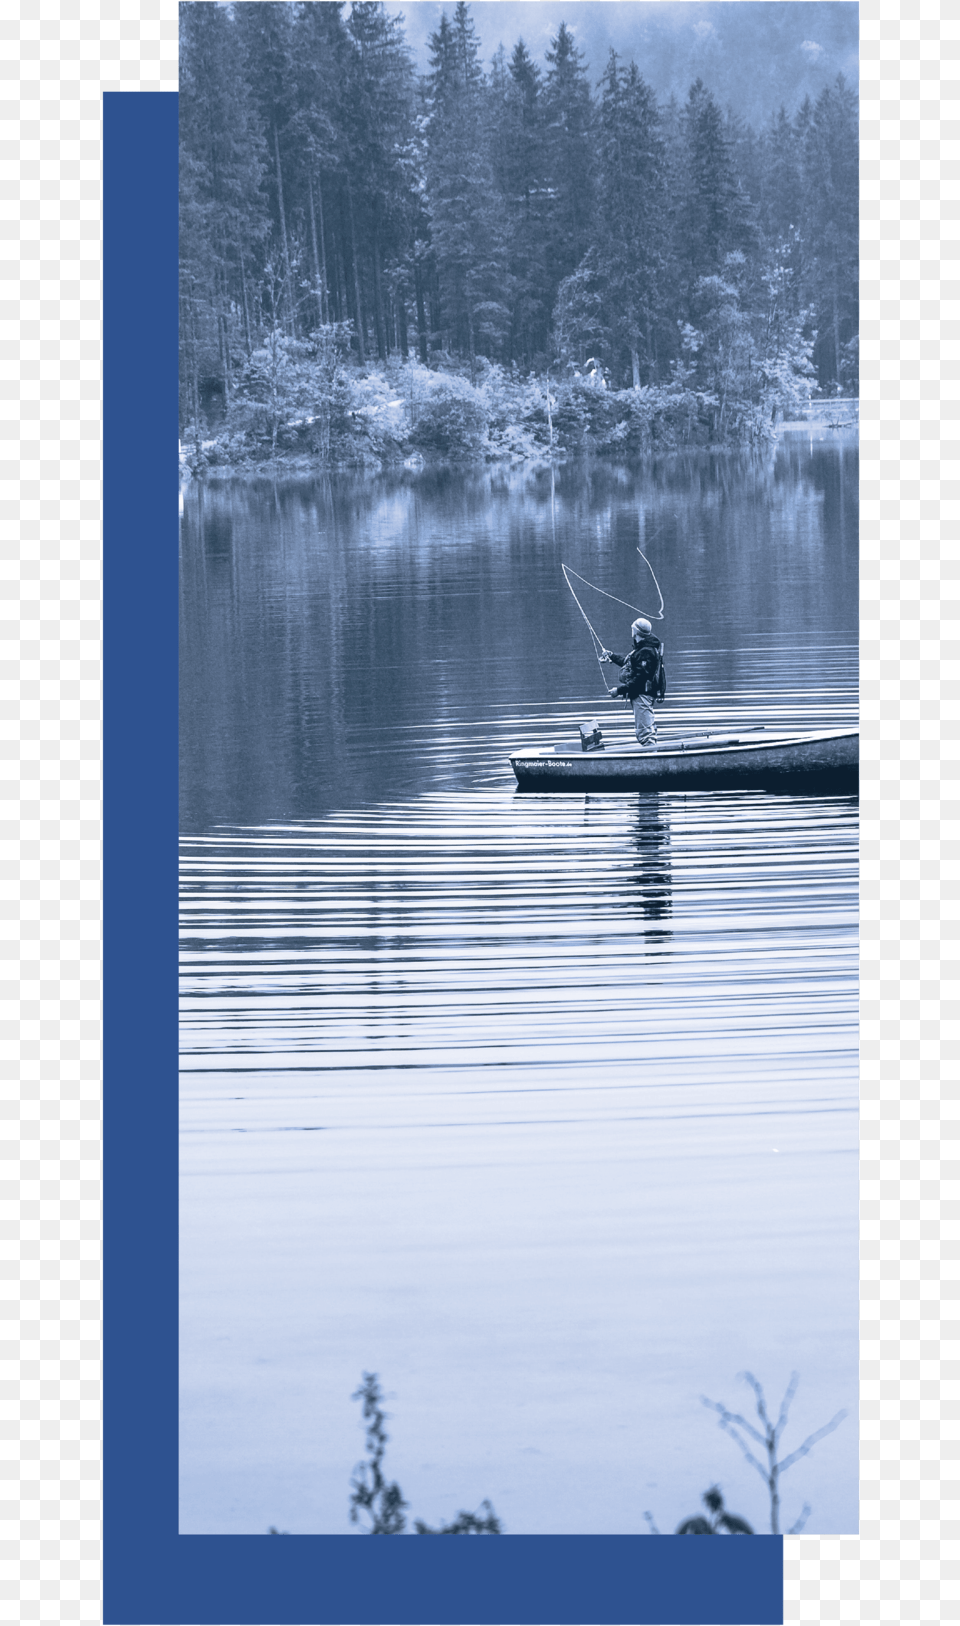 Dcu Ira Relax Attributes Of A Man Resolute, Outdoors, Water, Leisure Activities, Fishing Png Image